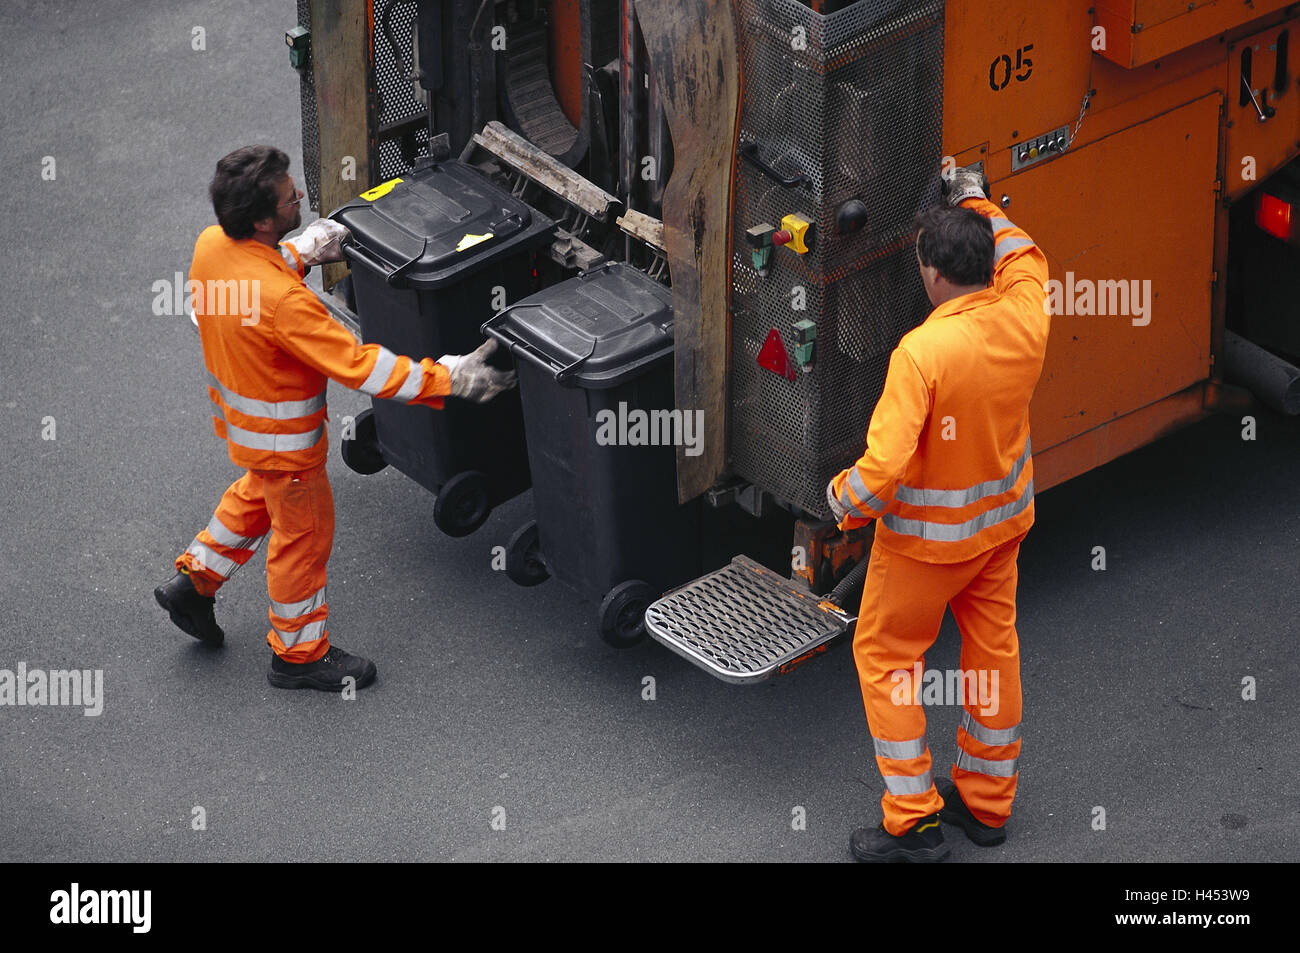 Germany, garbage collection, men, bins, emptying, garbage truck, detail, rear, garbage disposal company, disposal company, service, waste disposal, waste industry, people, garbage collectors, two, flush, empty, occupation, work, garbage bins, domestic waste bins, disposal, removal, waste, garbage, domestic waste, residual waste, vehicle, truck, special vehicle, garbage truck, bin lorry, rear loader, cleaning, protective clothing, luminous colours, orange, reflecting, Stock Photo